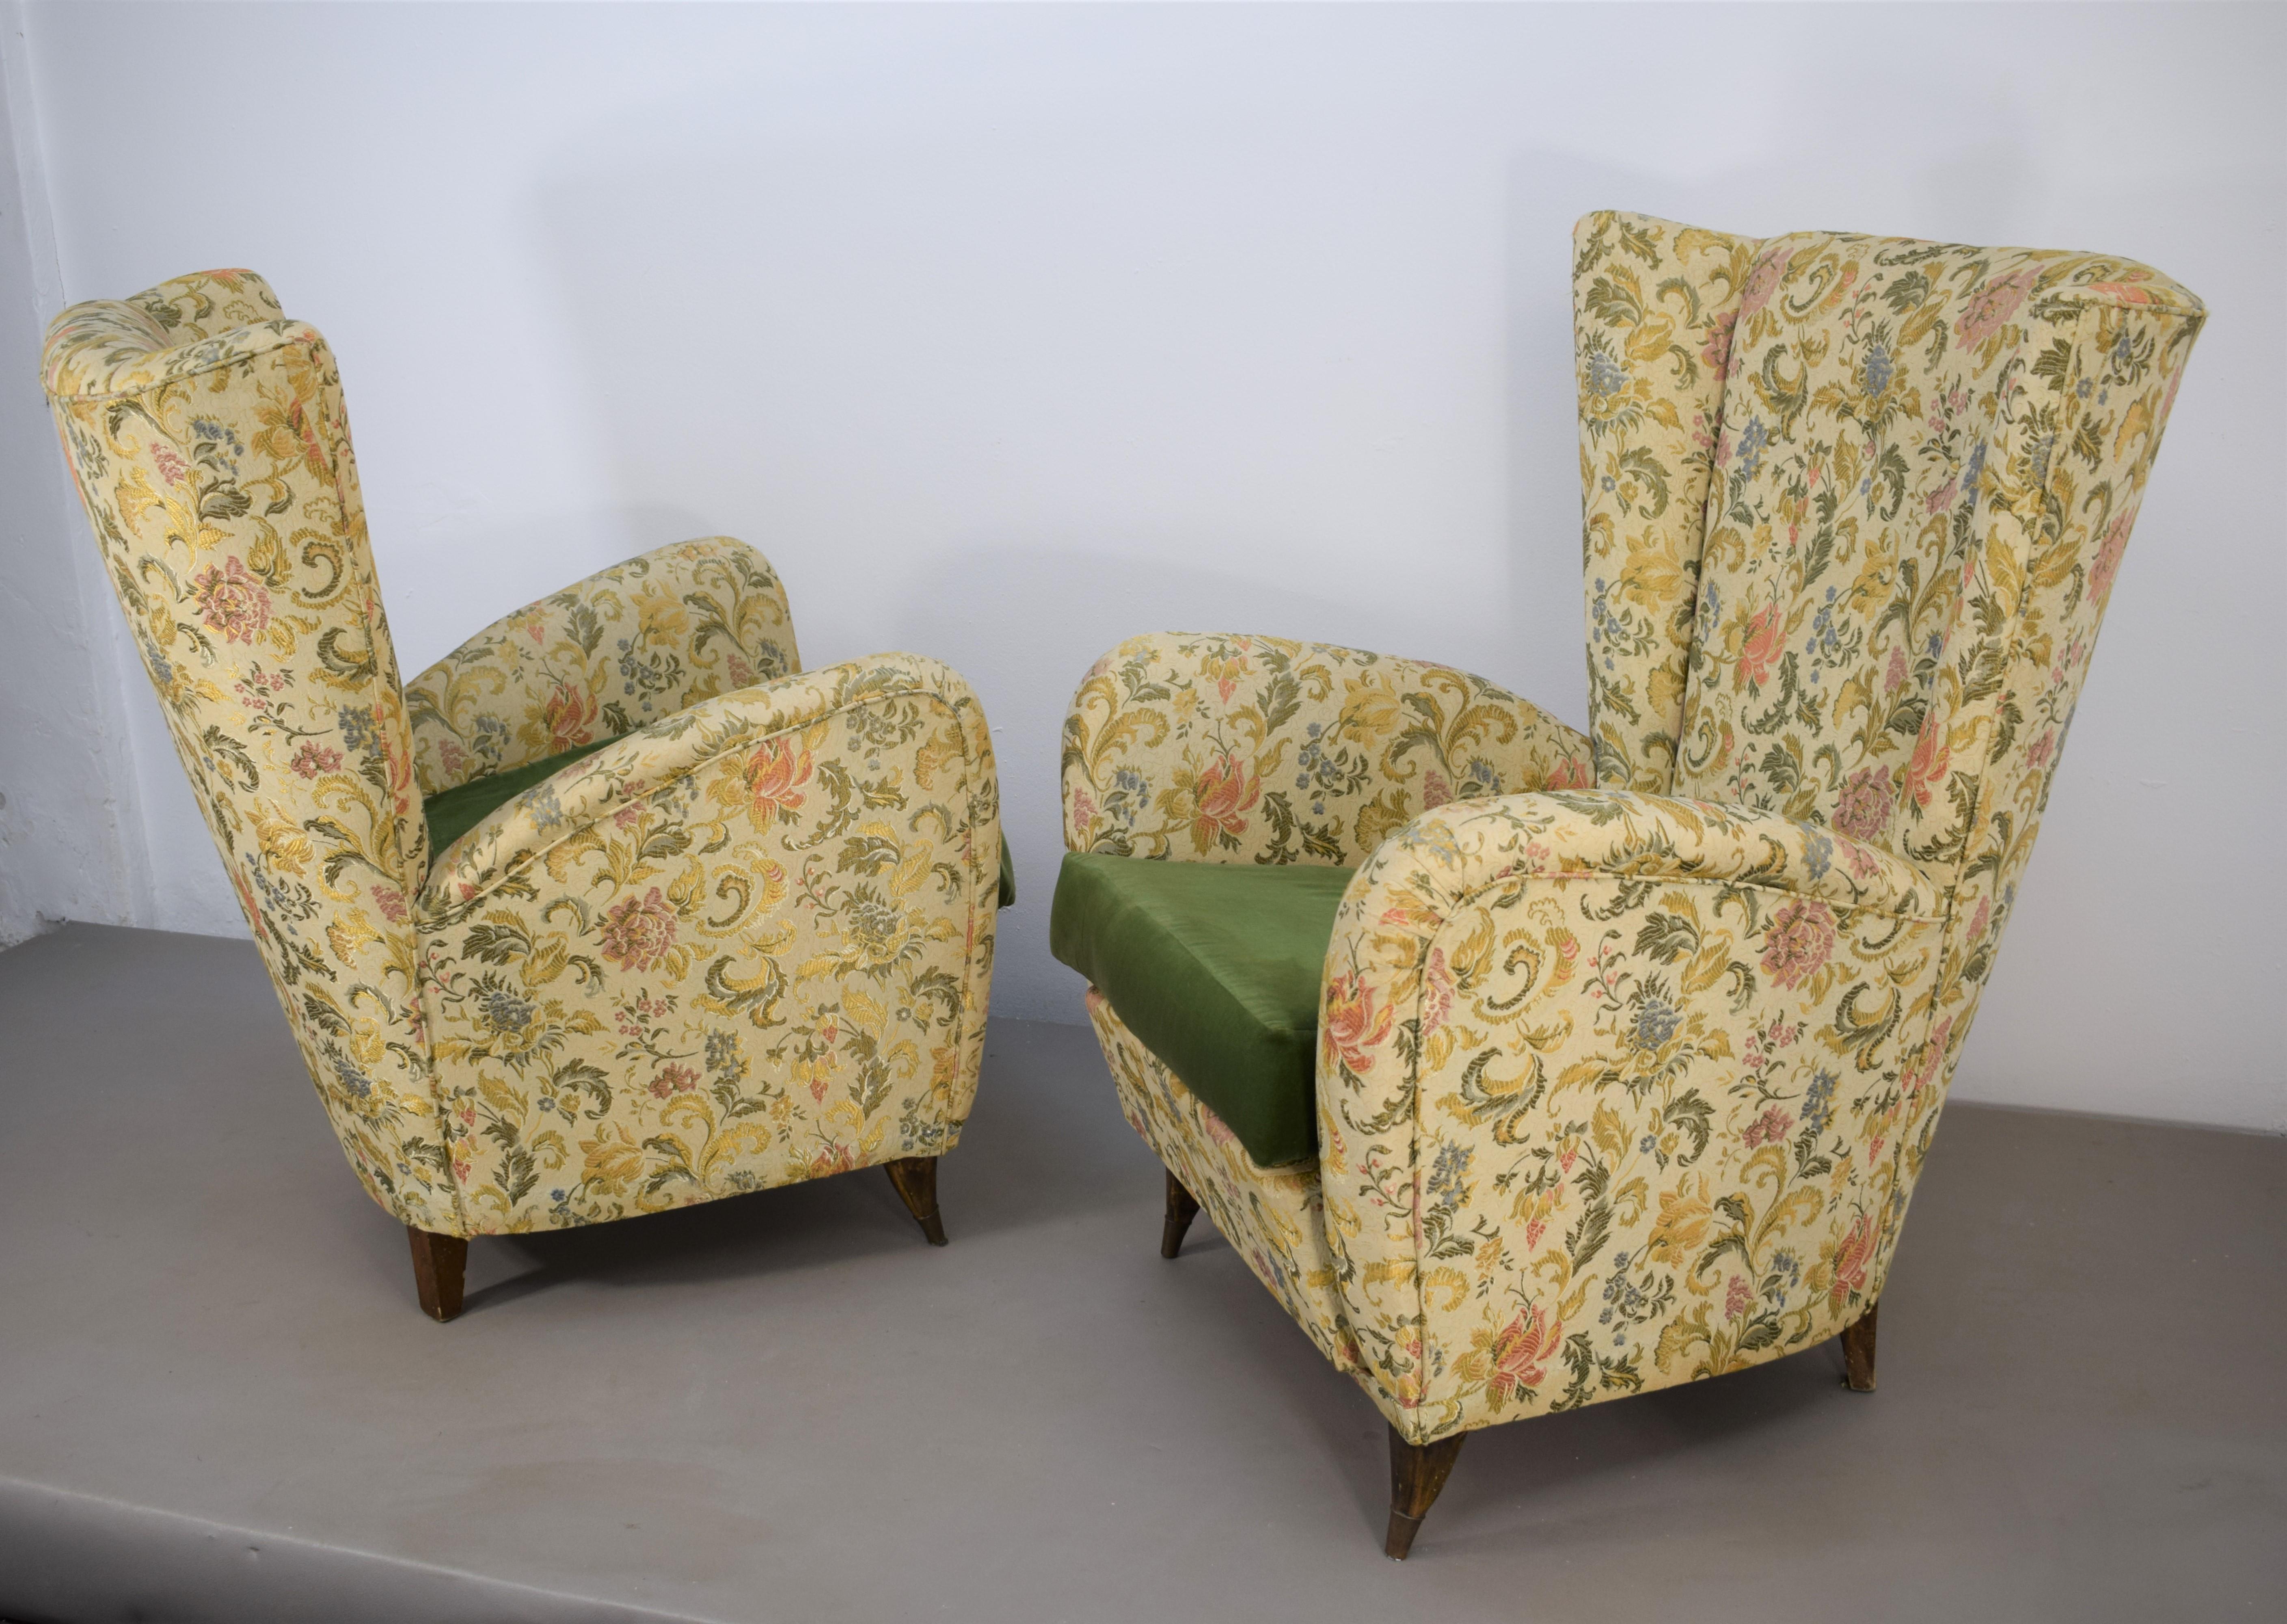 Pair of italian armchairs by Paolo Buffa, 1950s.

Dimensions: H= 94 cm; W= 72 cm; D= 77 cm; H seat= 43 cm.